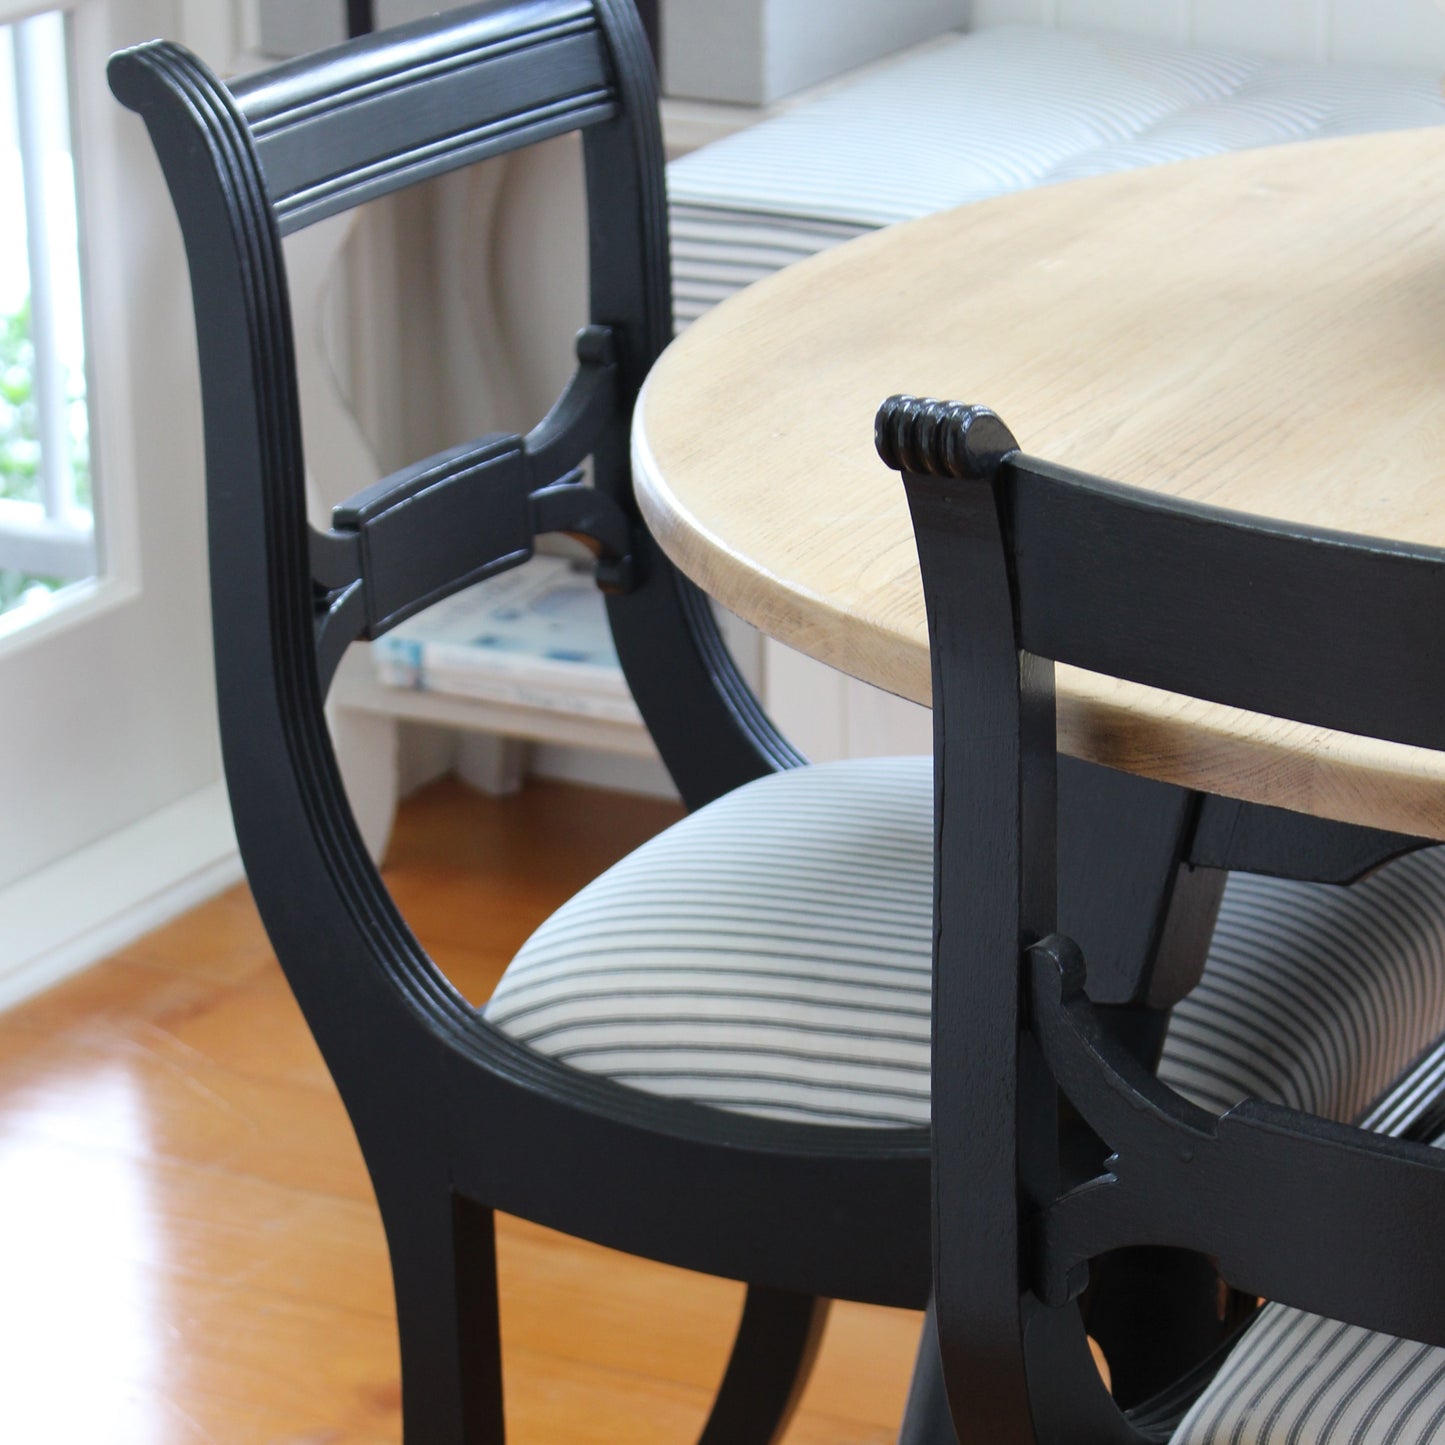 Dining chair painted Black using Blake & Taylor Chalk Furniture Paint